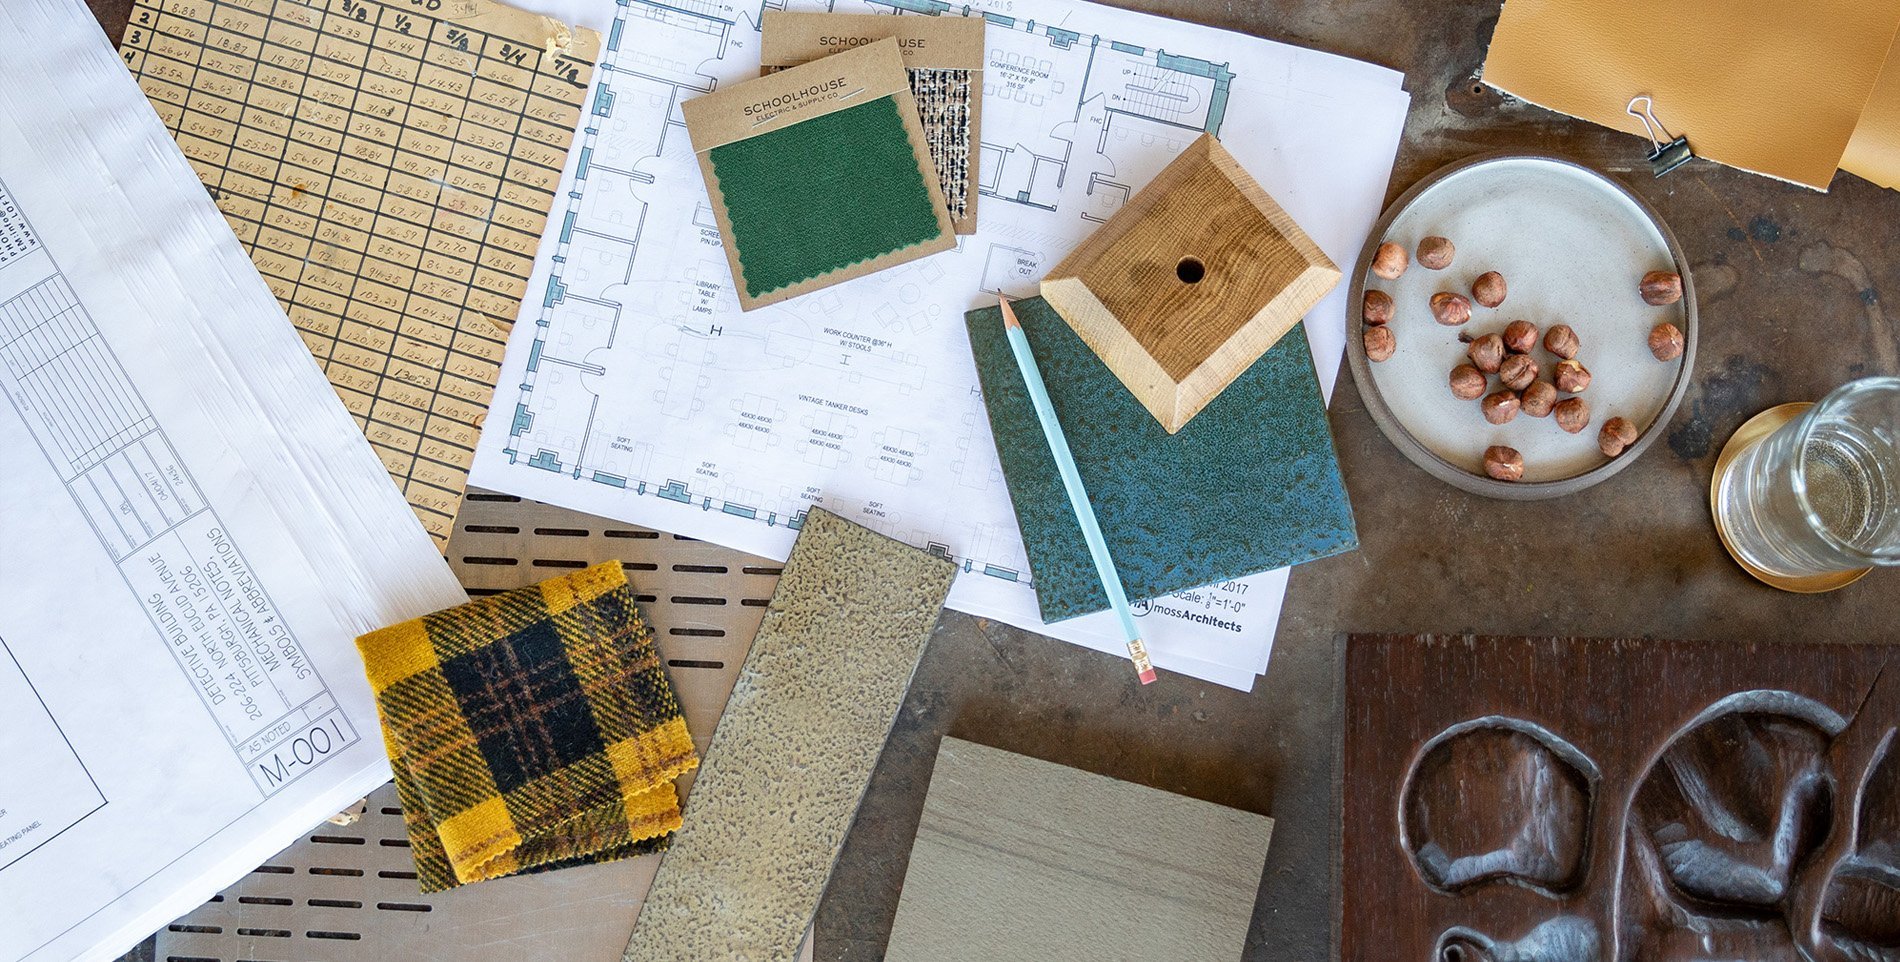 Design floor plan, materials, fabrics samples, textiles, and more on top of a concrete table.